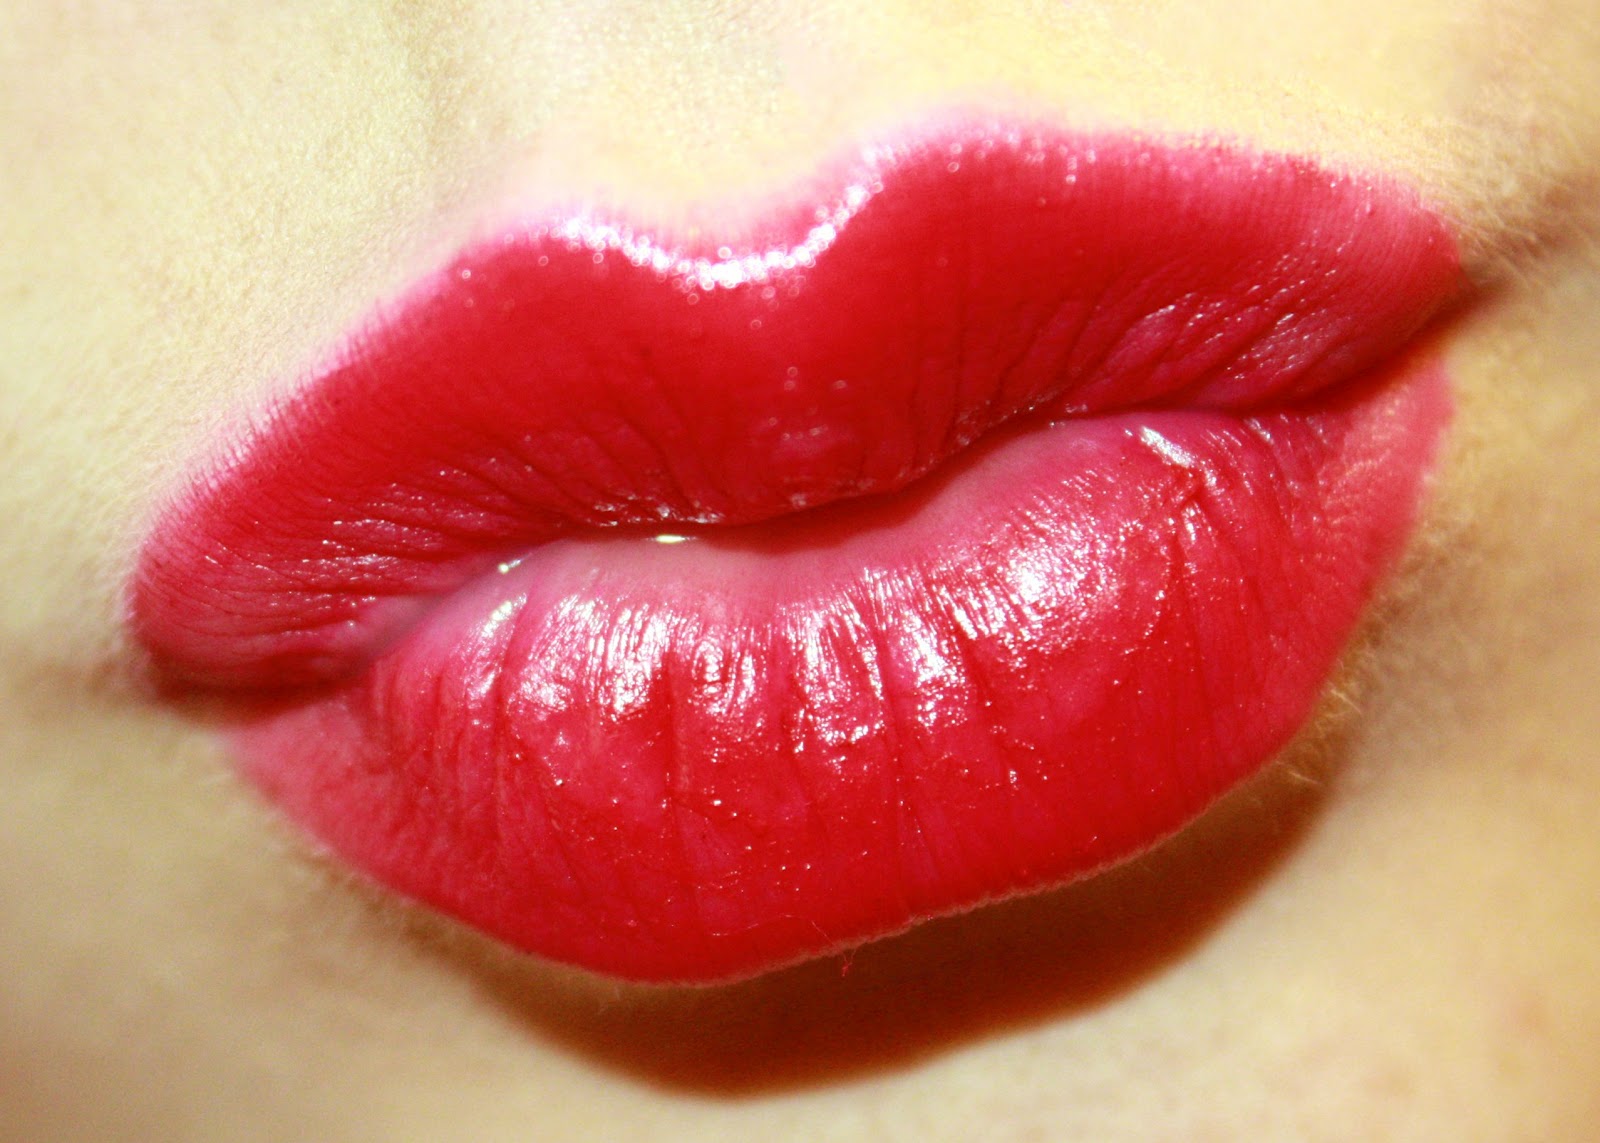 Lips to lips kissing